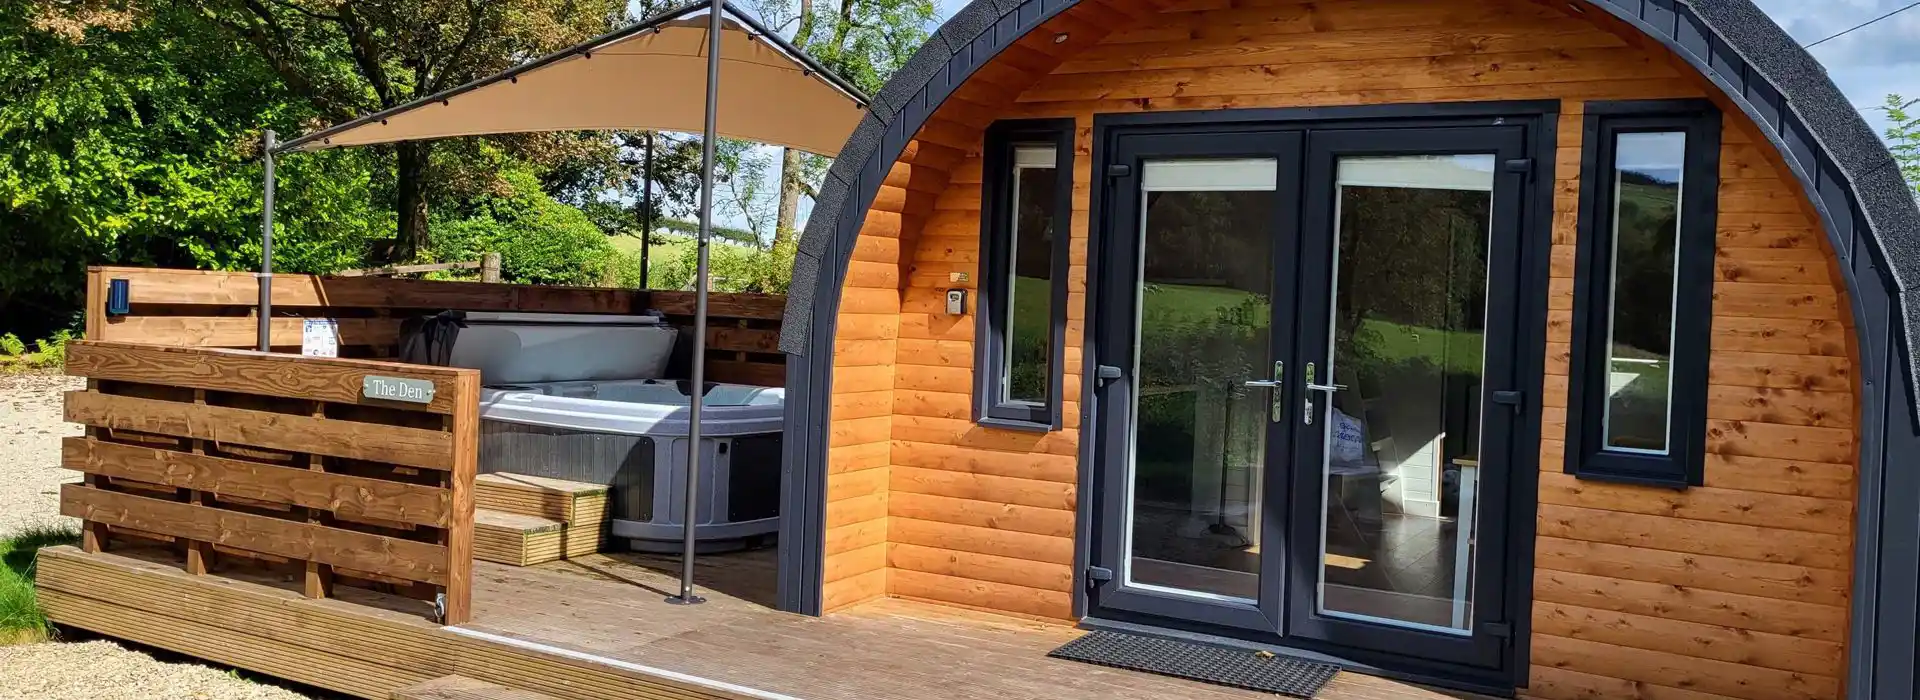 Camping and glamping pods with hot tubs in Scotland